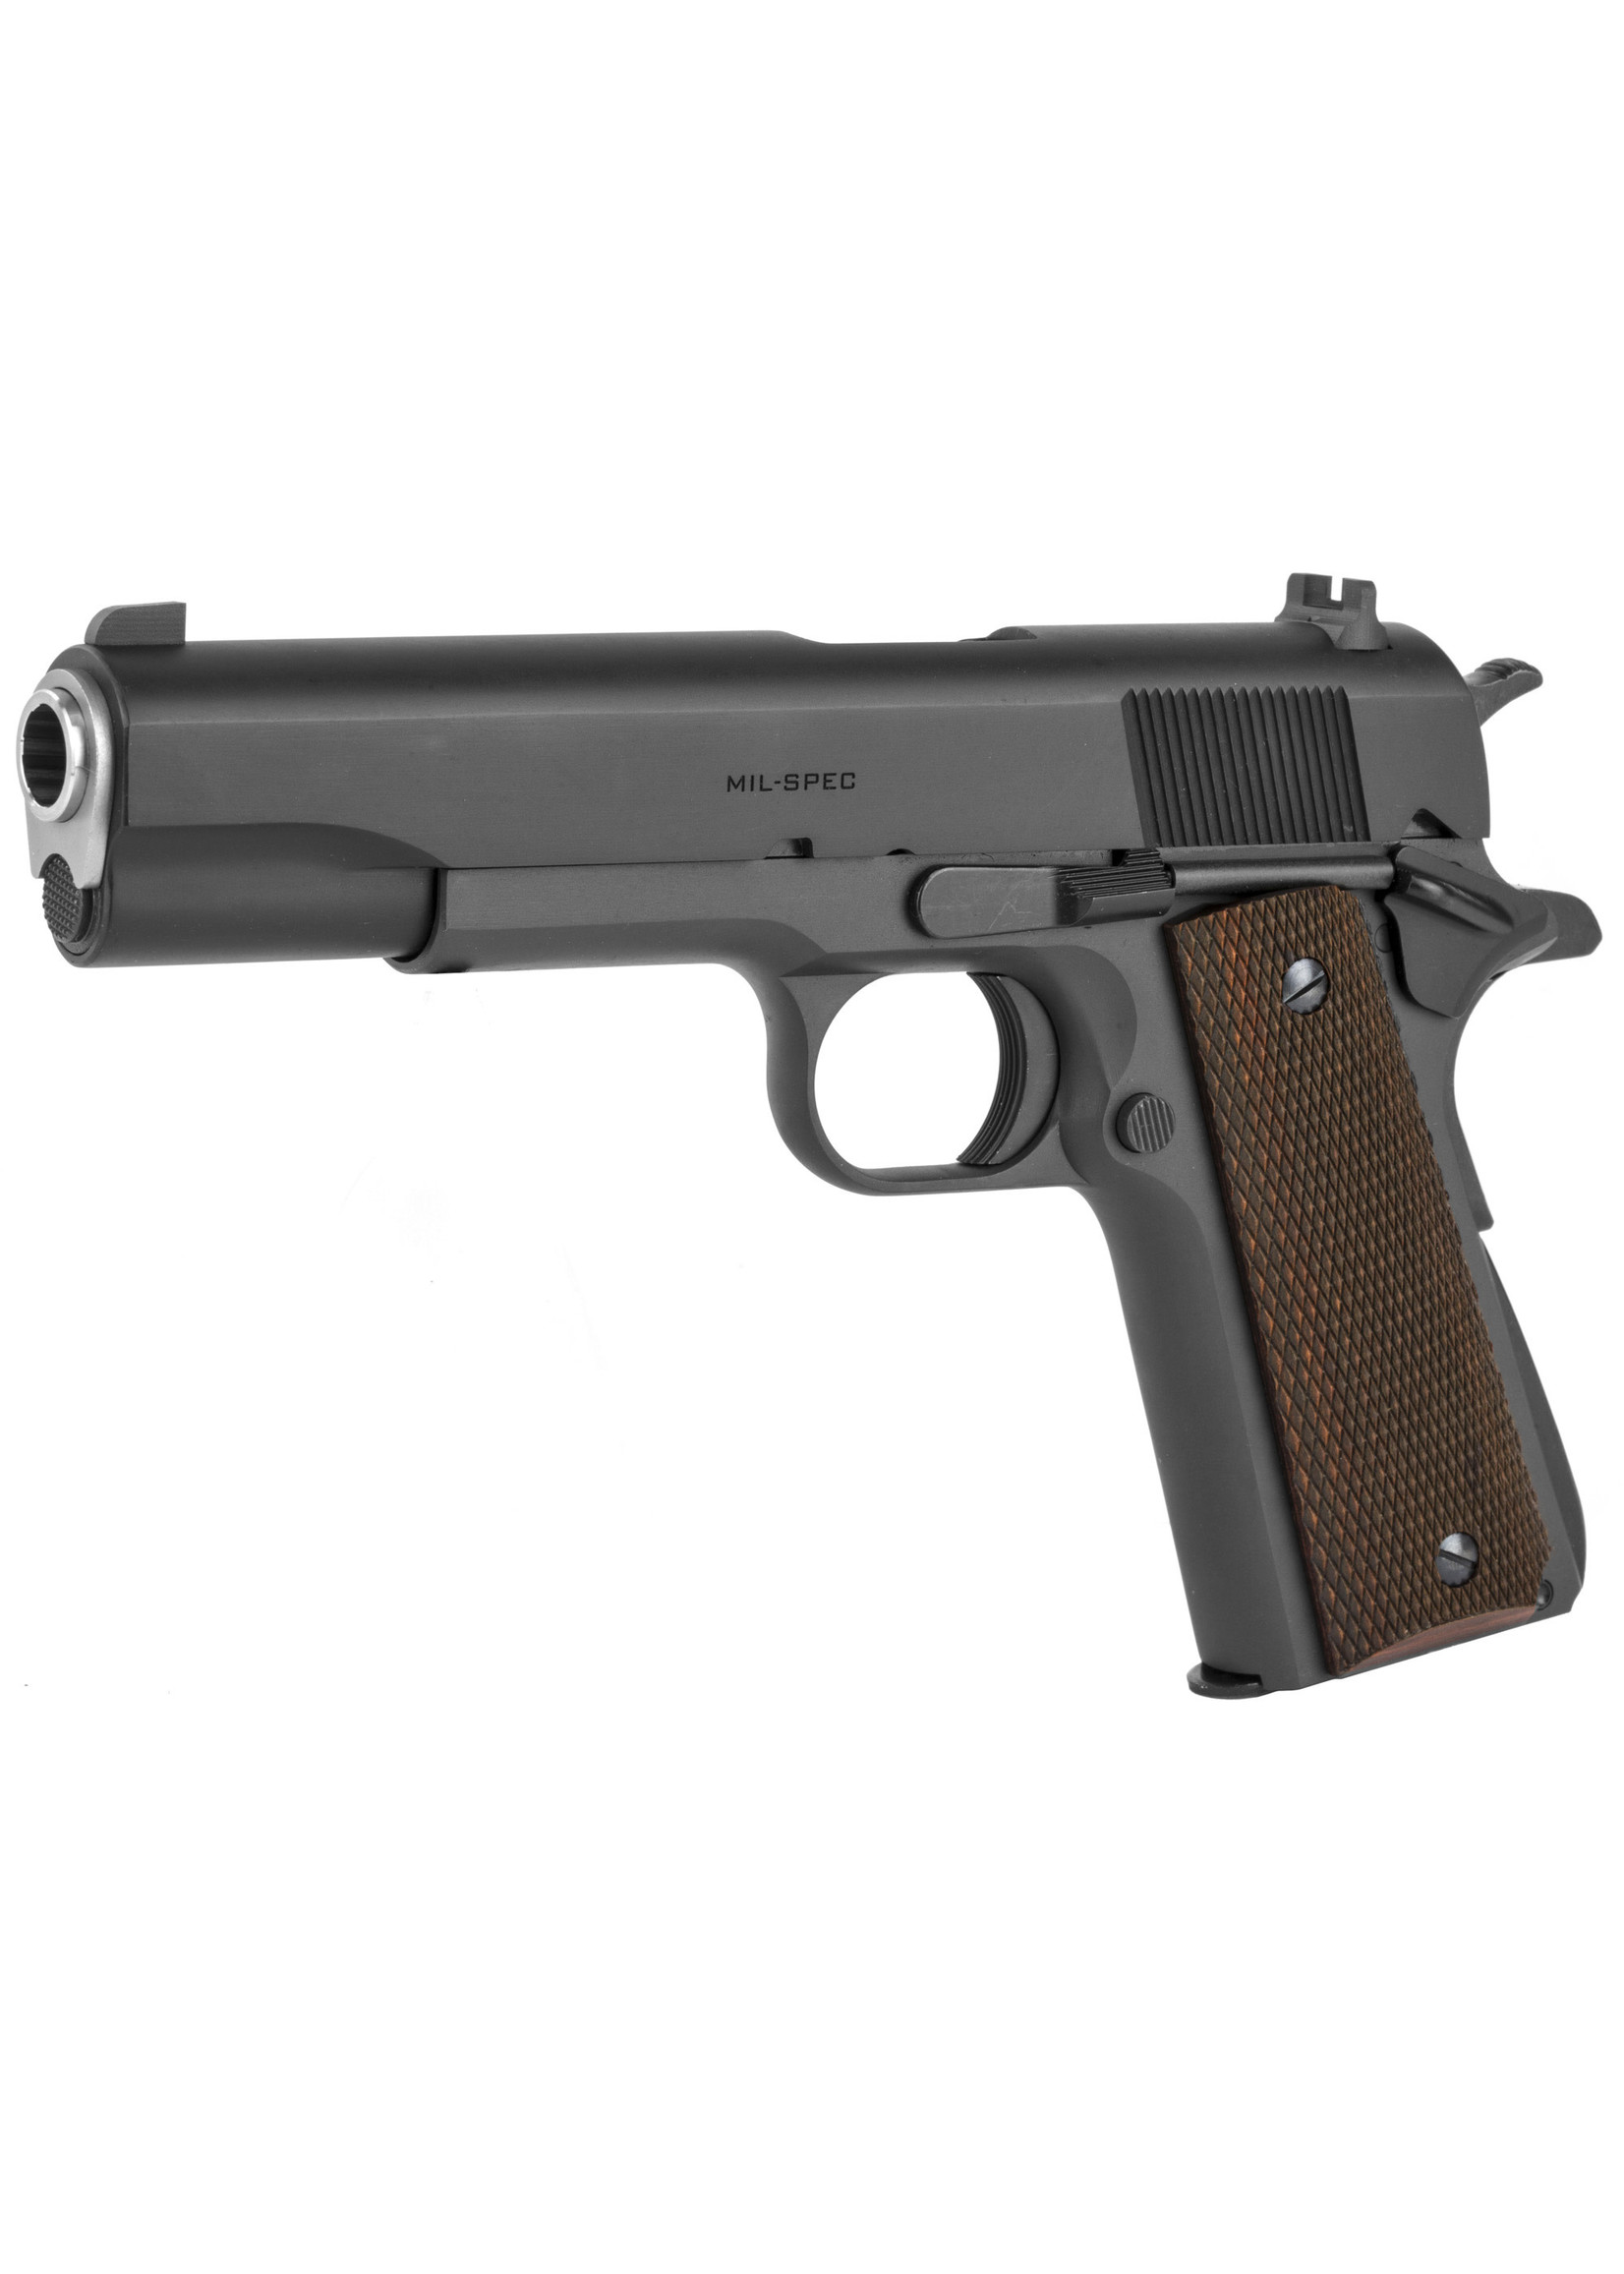 Springfield Armory Springfield Armory 1911 Mil-Spec Defender Legacy 45 ACP Caliber with 5" Barrel, 7+1 Capacity, Overall Black Parkerized Finish Carbon Steel, Beavertail Frame, Serrated Slide & Crossed Cannon Cocobolo Grip